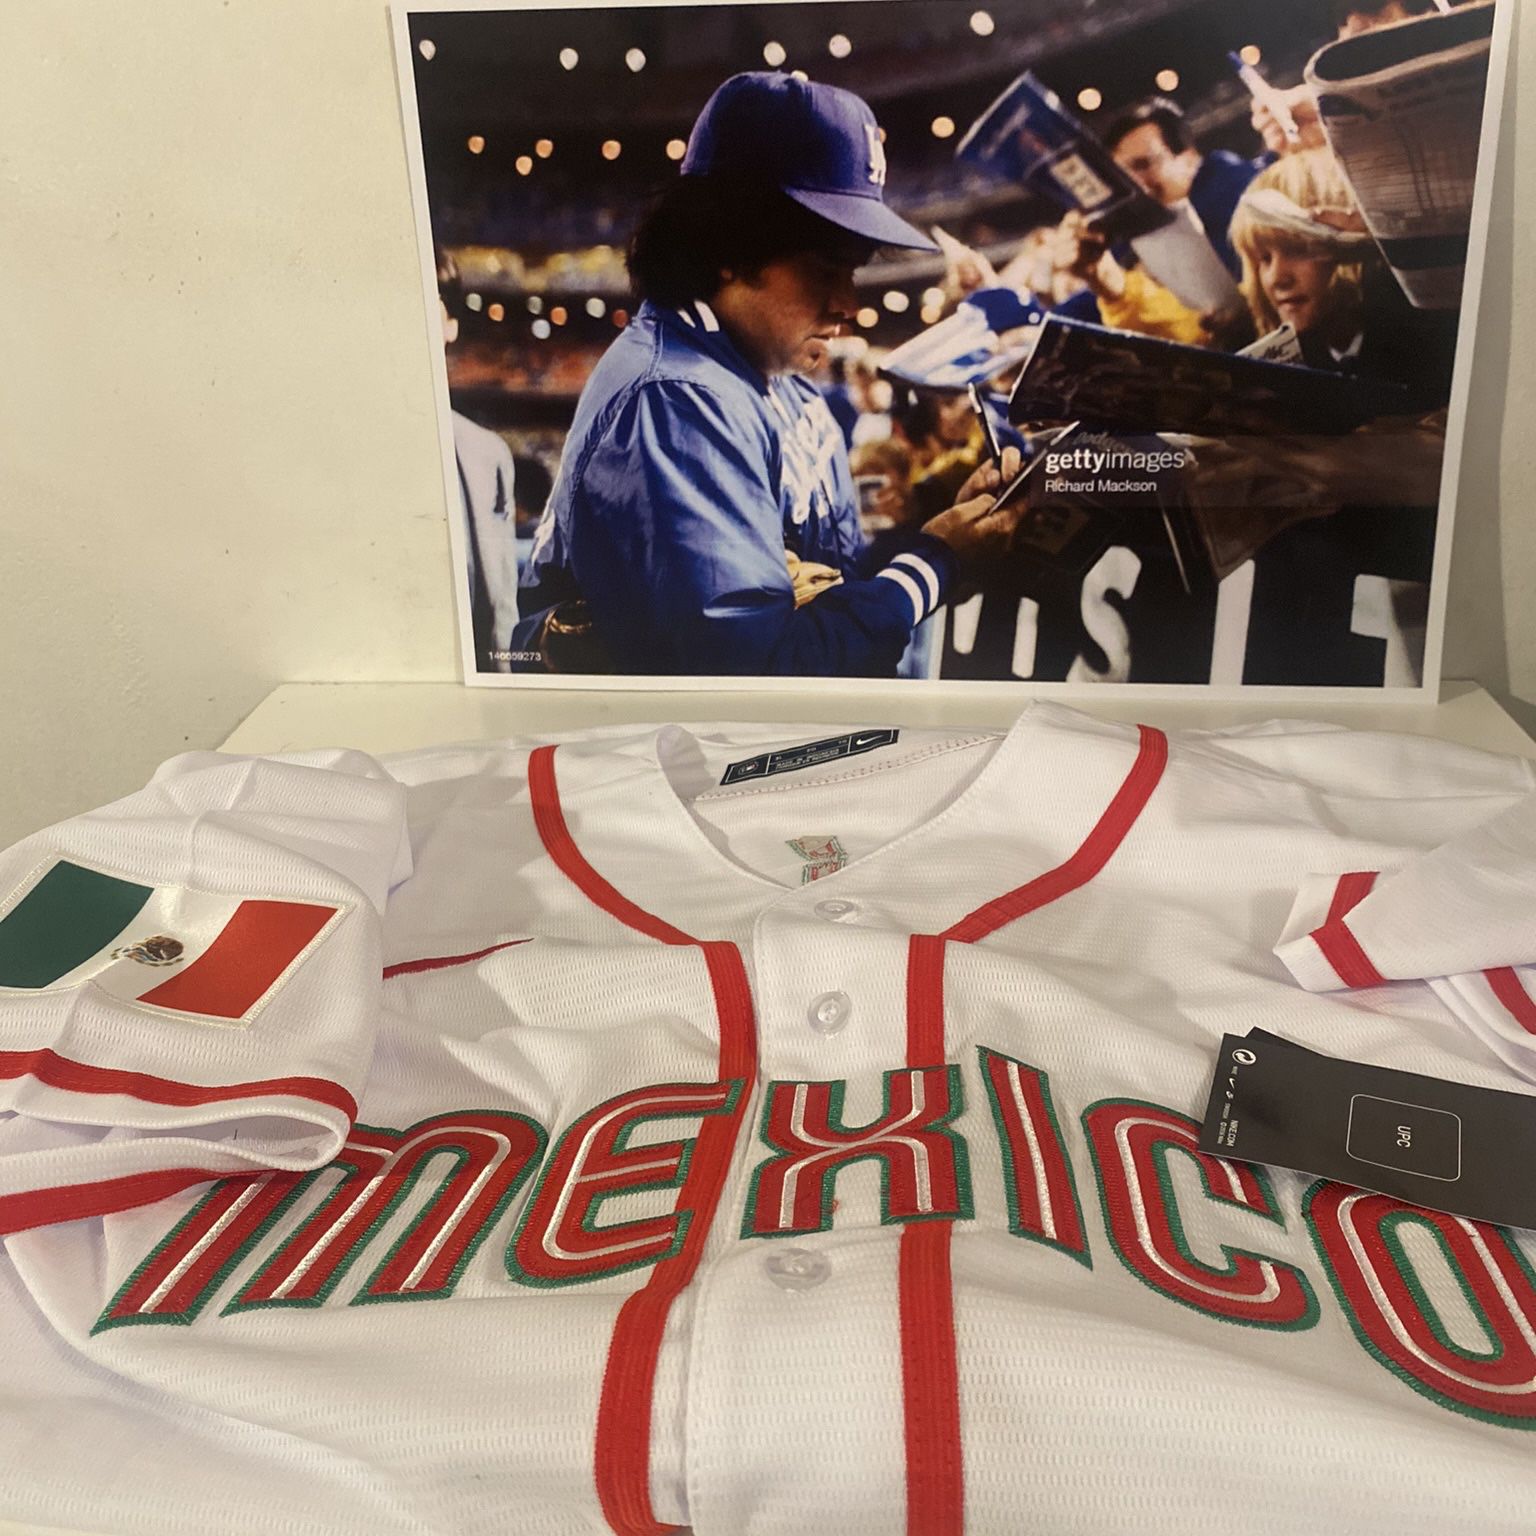 $55 Free Shipping Baseball Jerseys for Sale in Stockton, CA - OfferUp